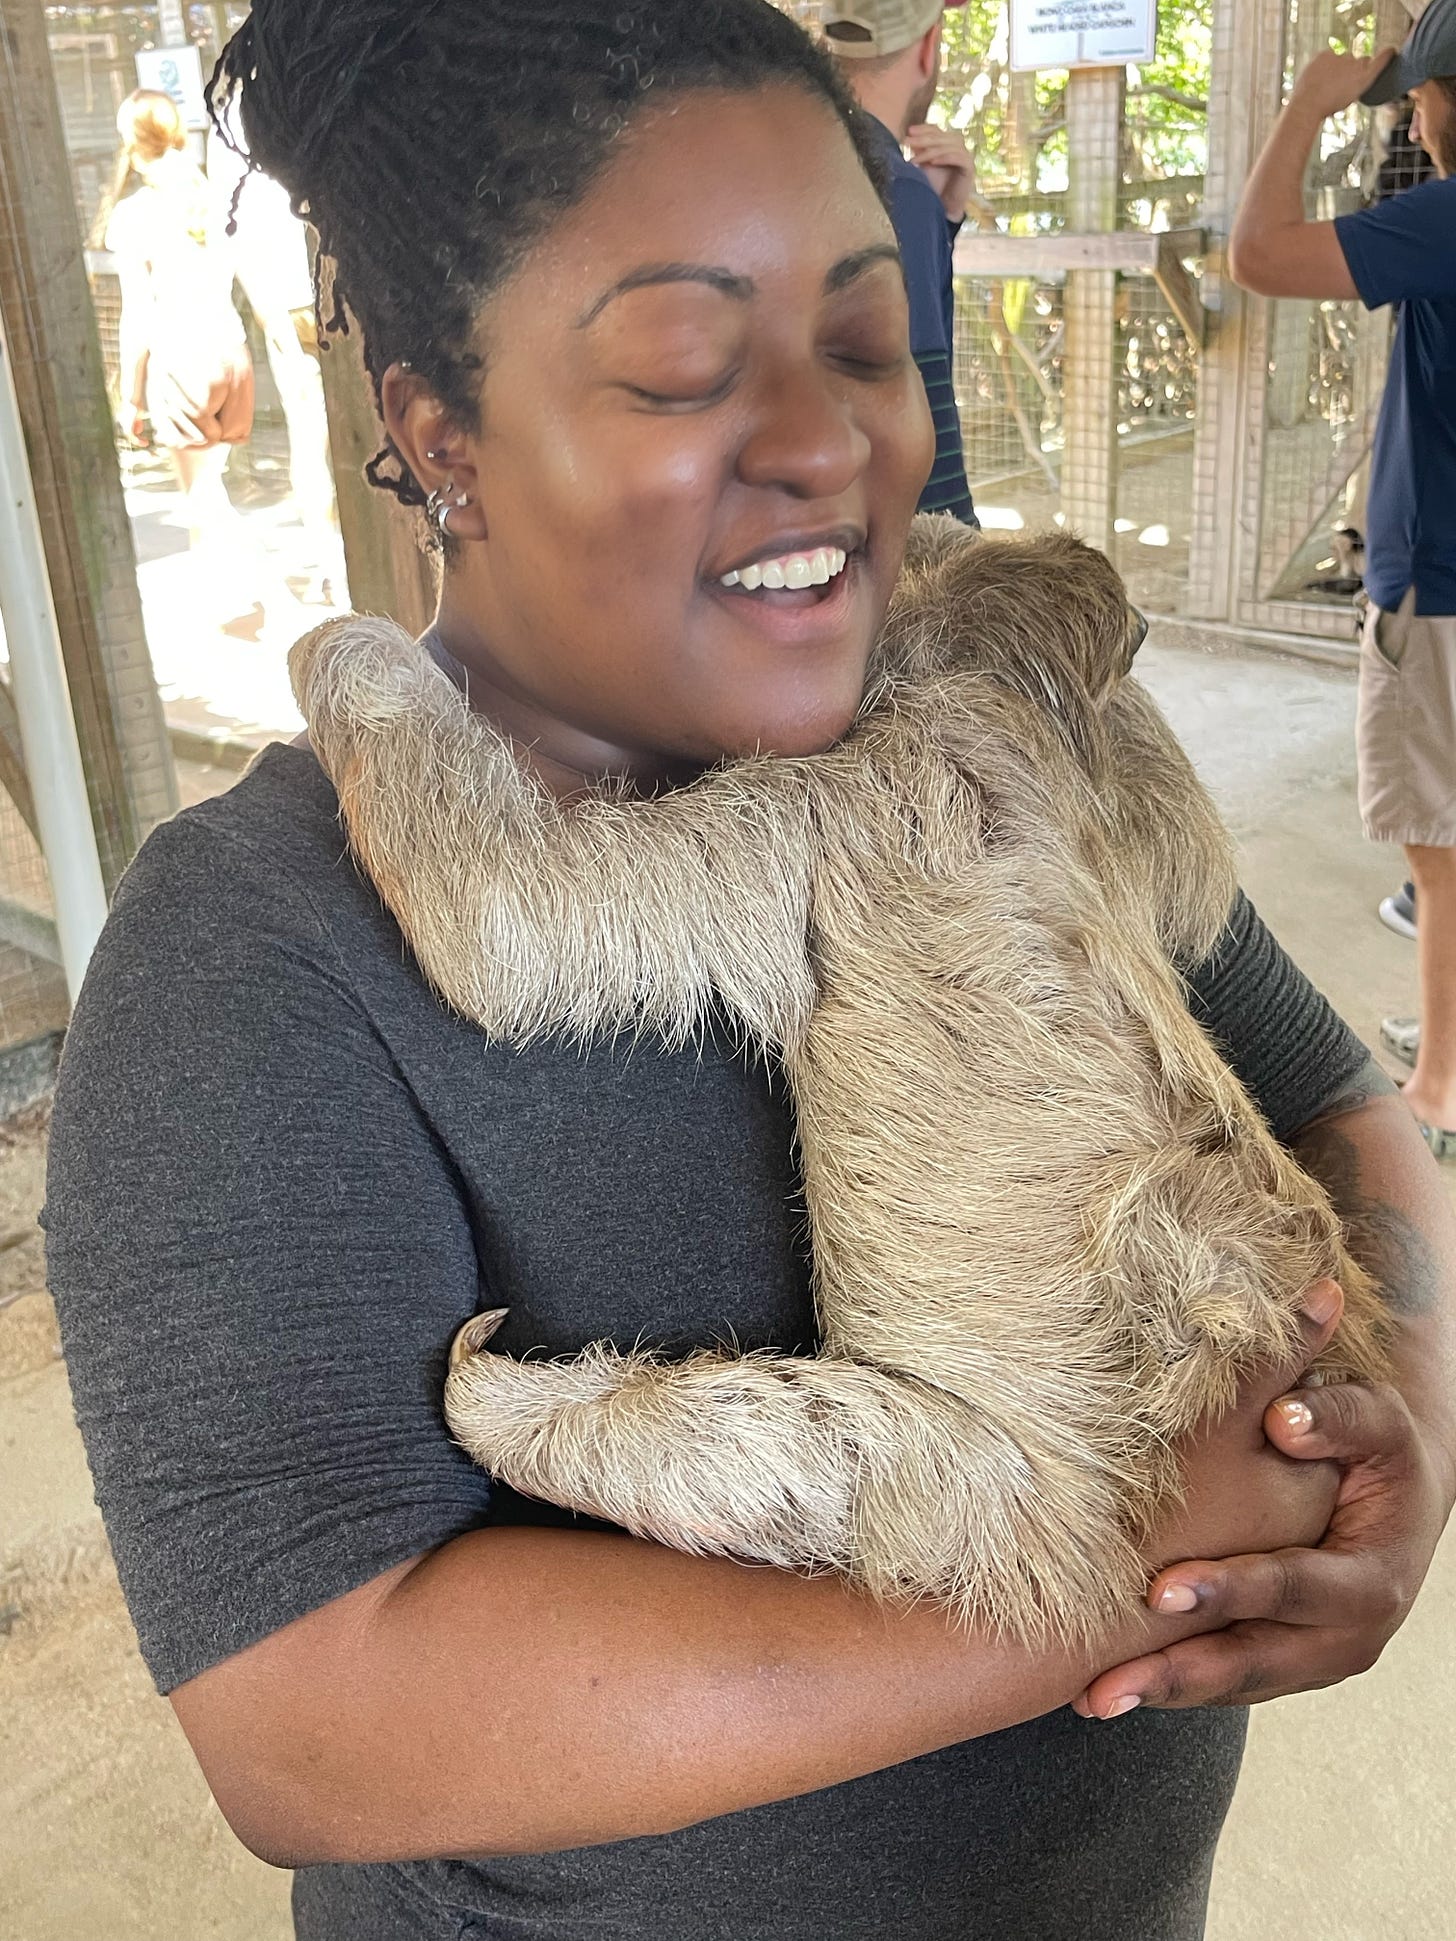 A nonbinary Black person holding a slot at an animal sanctuary 